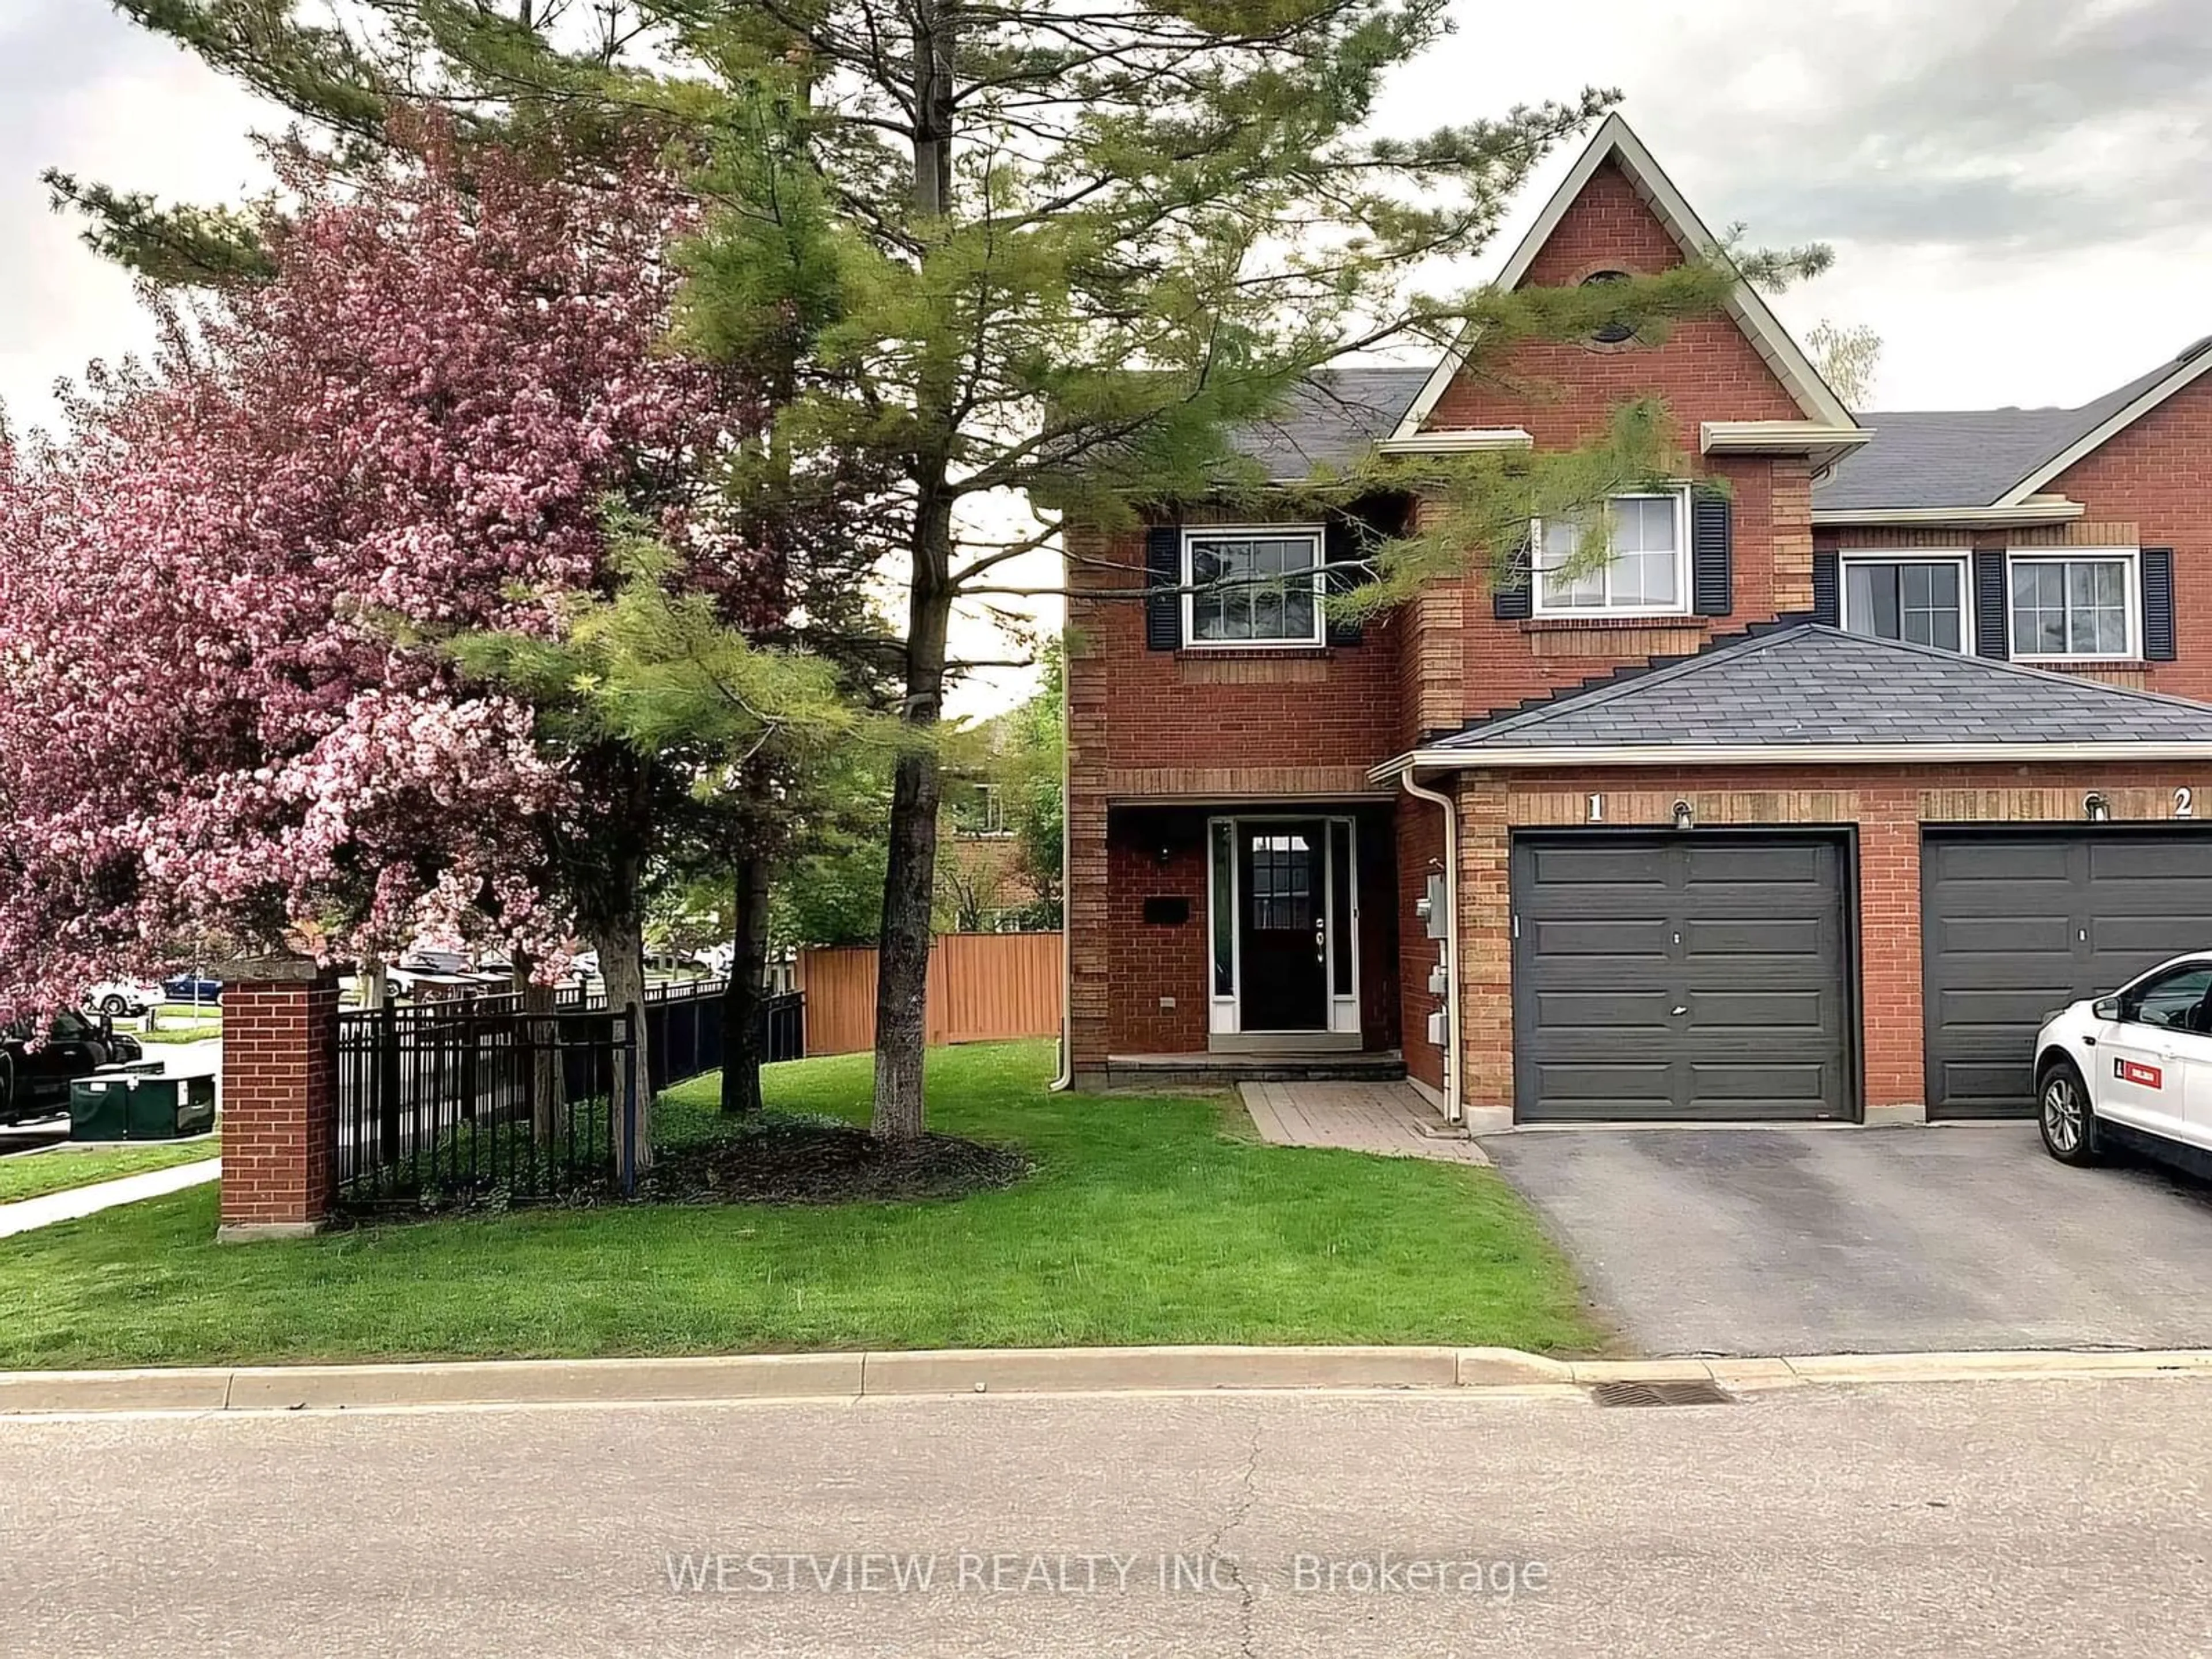 Home with brick exterior material for 165 Kozlov St #1, Barrie Ontario L4N 7M7